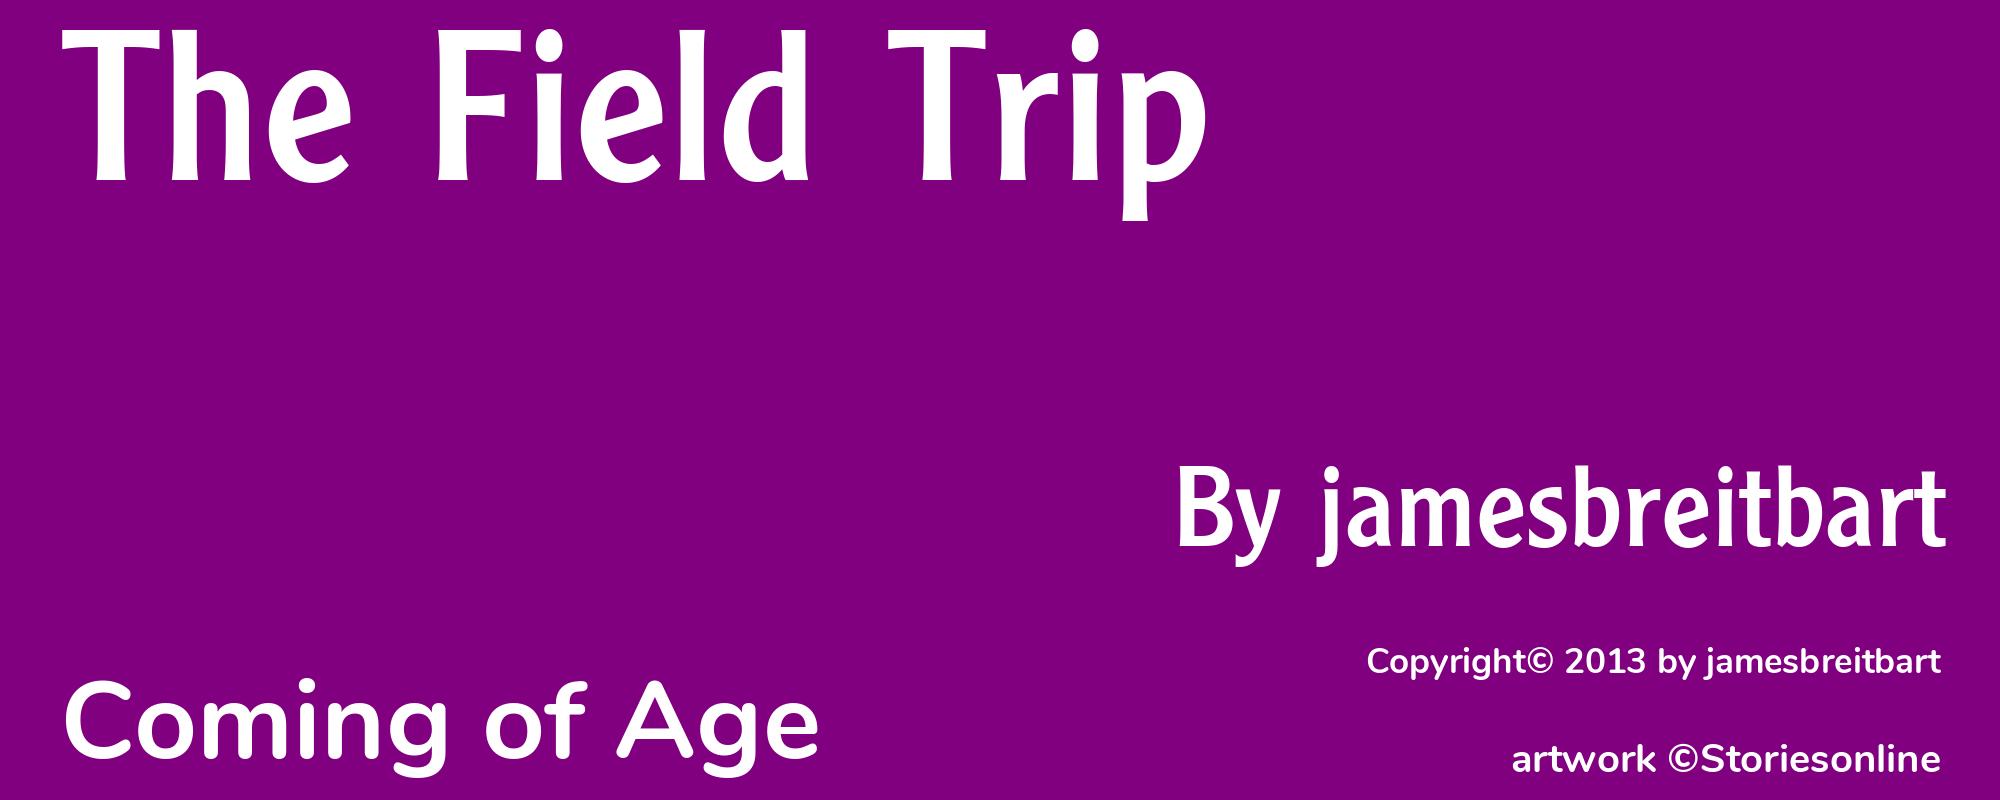 The Field Trip - Cover